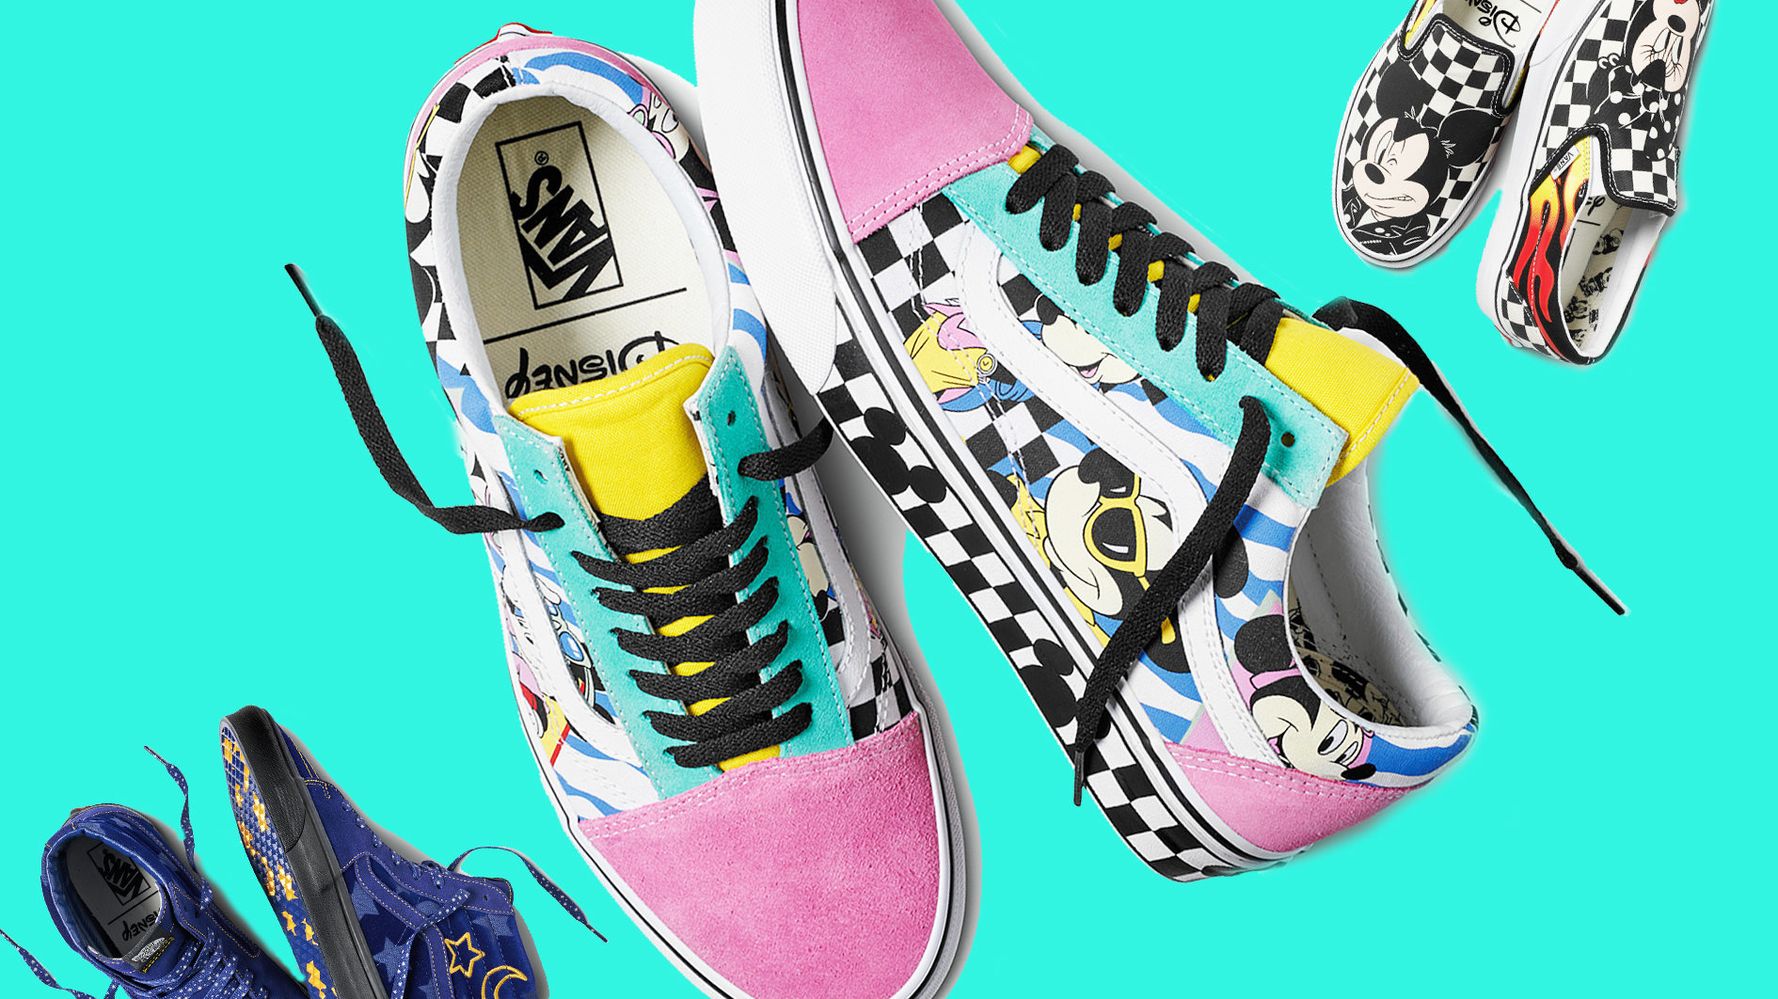 Disney Vans Launched In The UK Celebrate Mickey Mouse's 90th Anniversary HuffPost UK